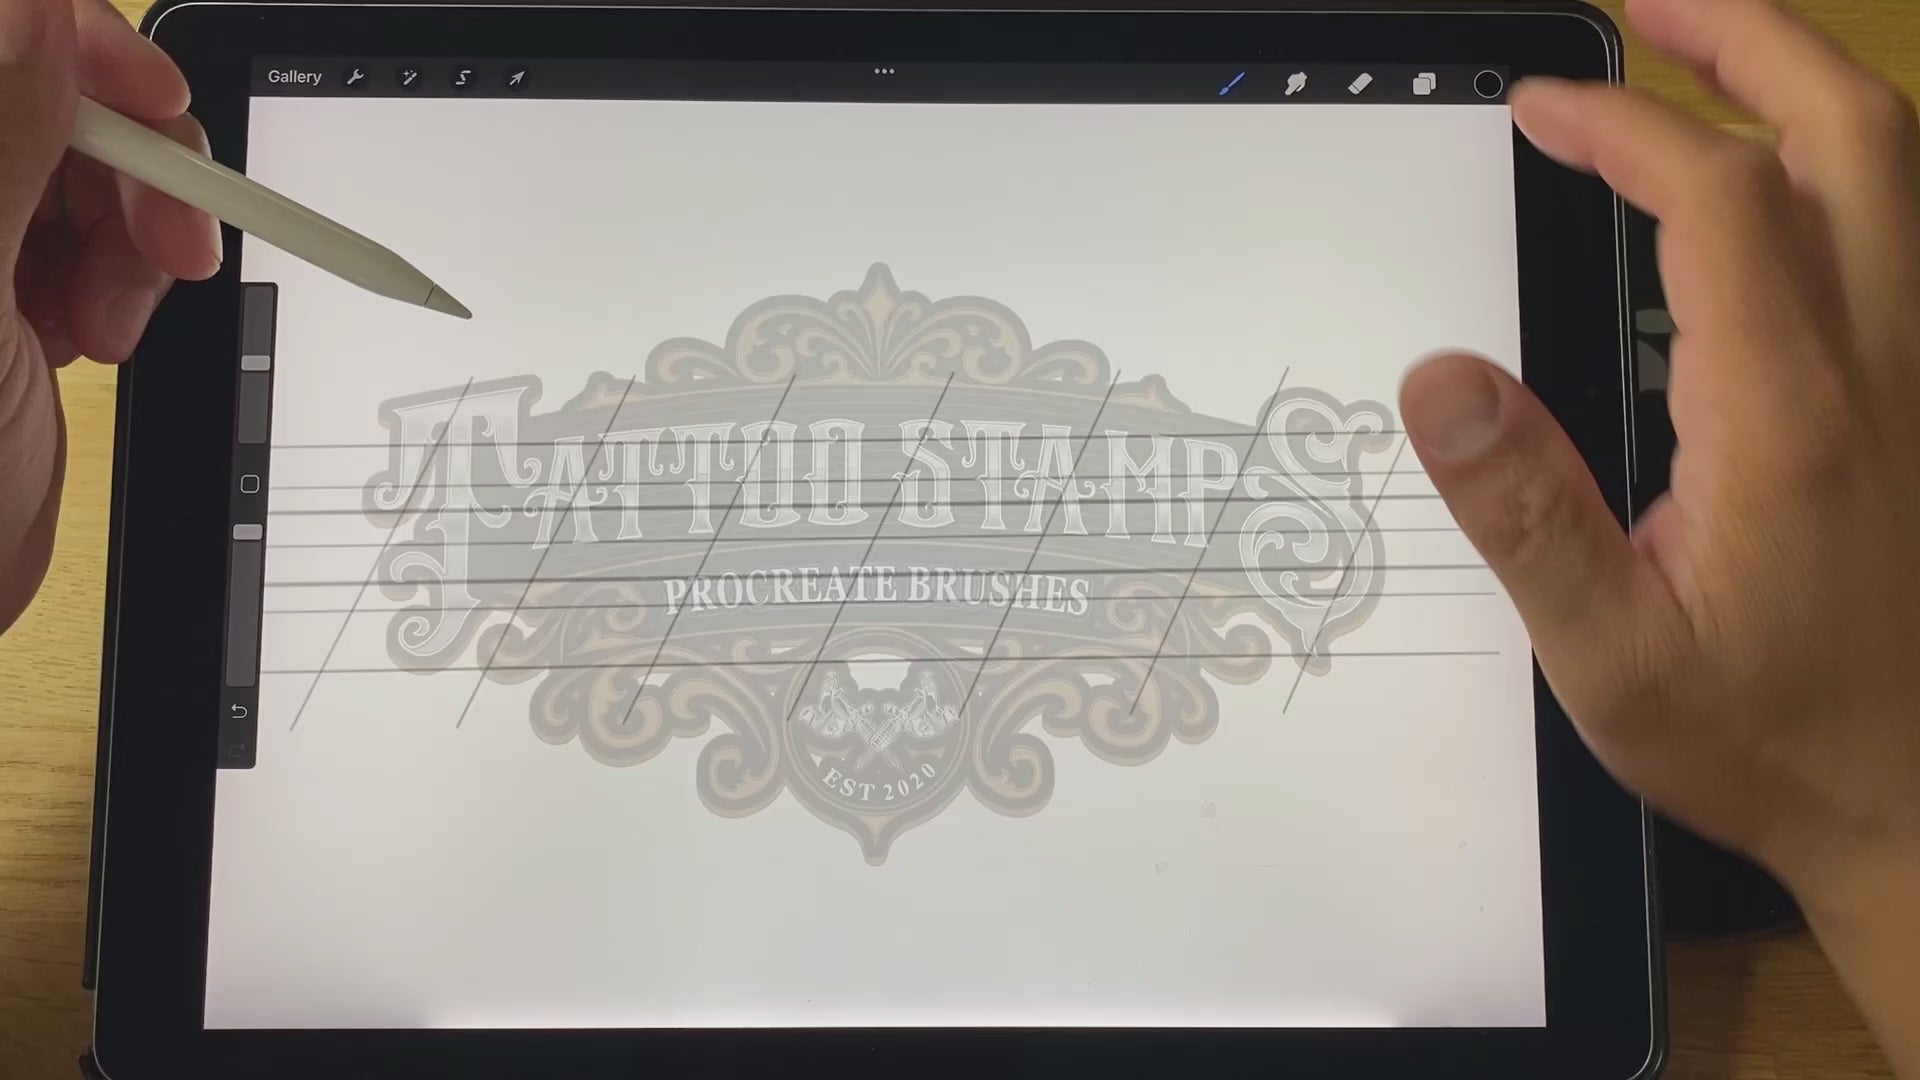 218 Chicano Lettering Tattoo Brushes in this Brushset Pack Volume